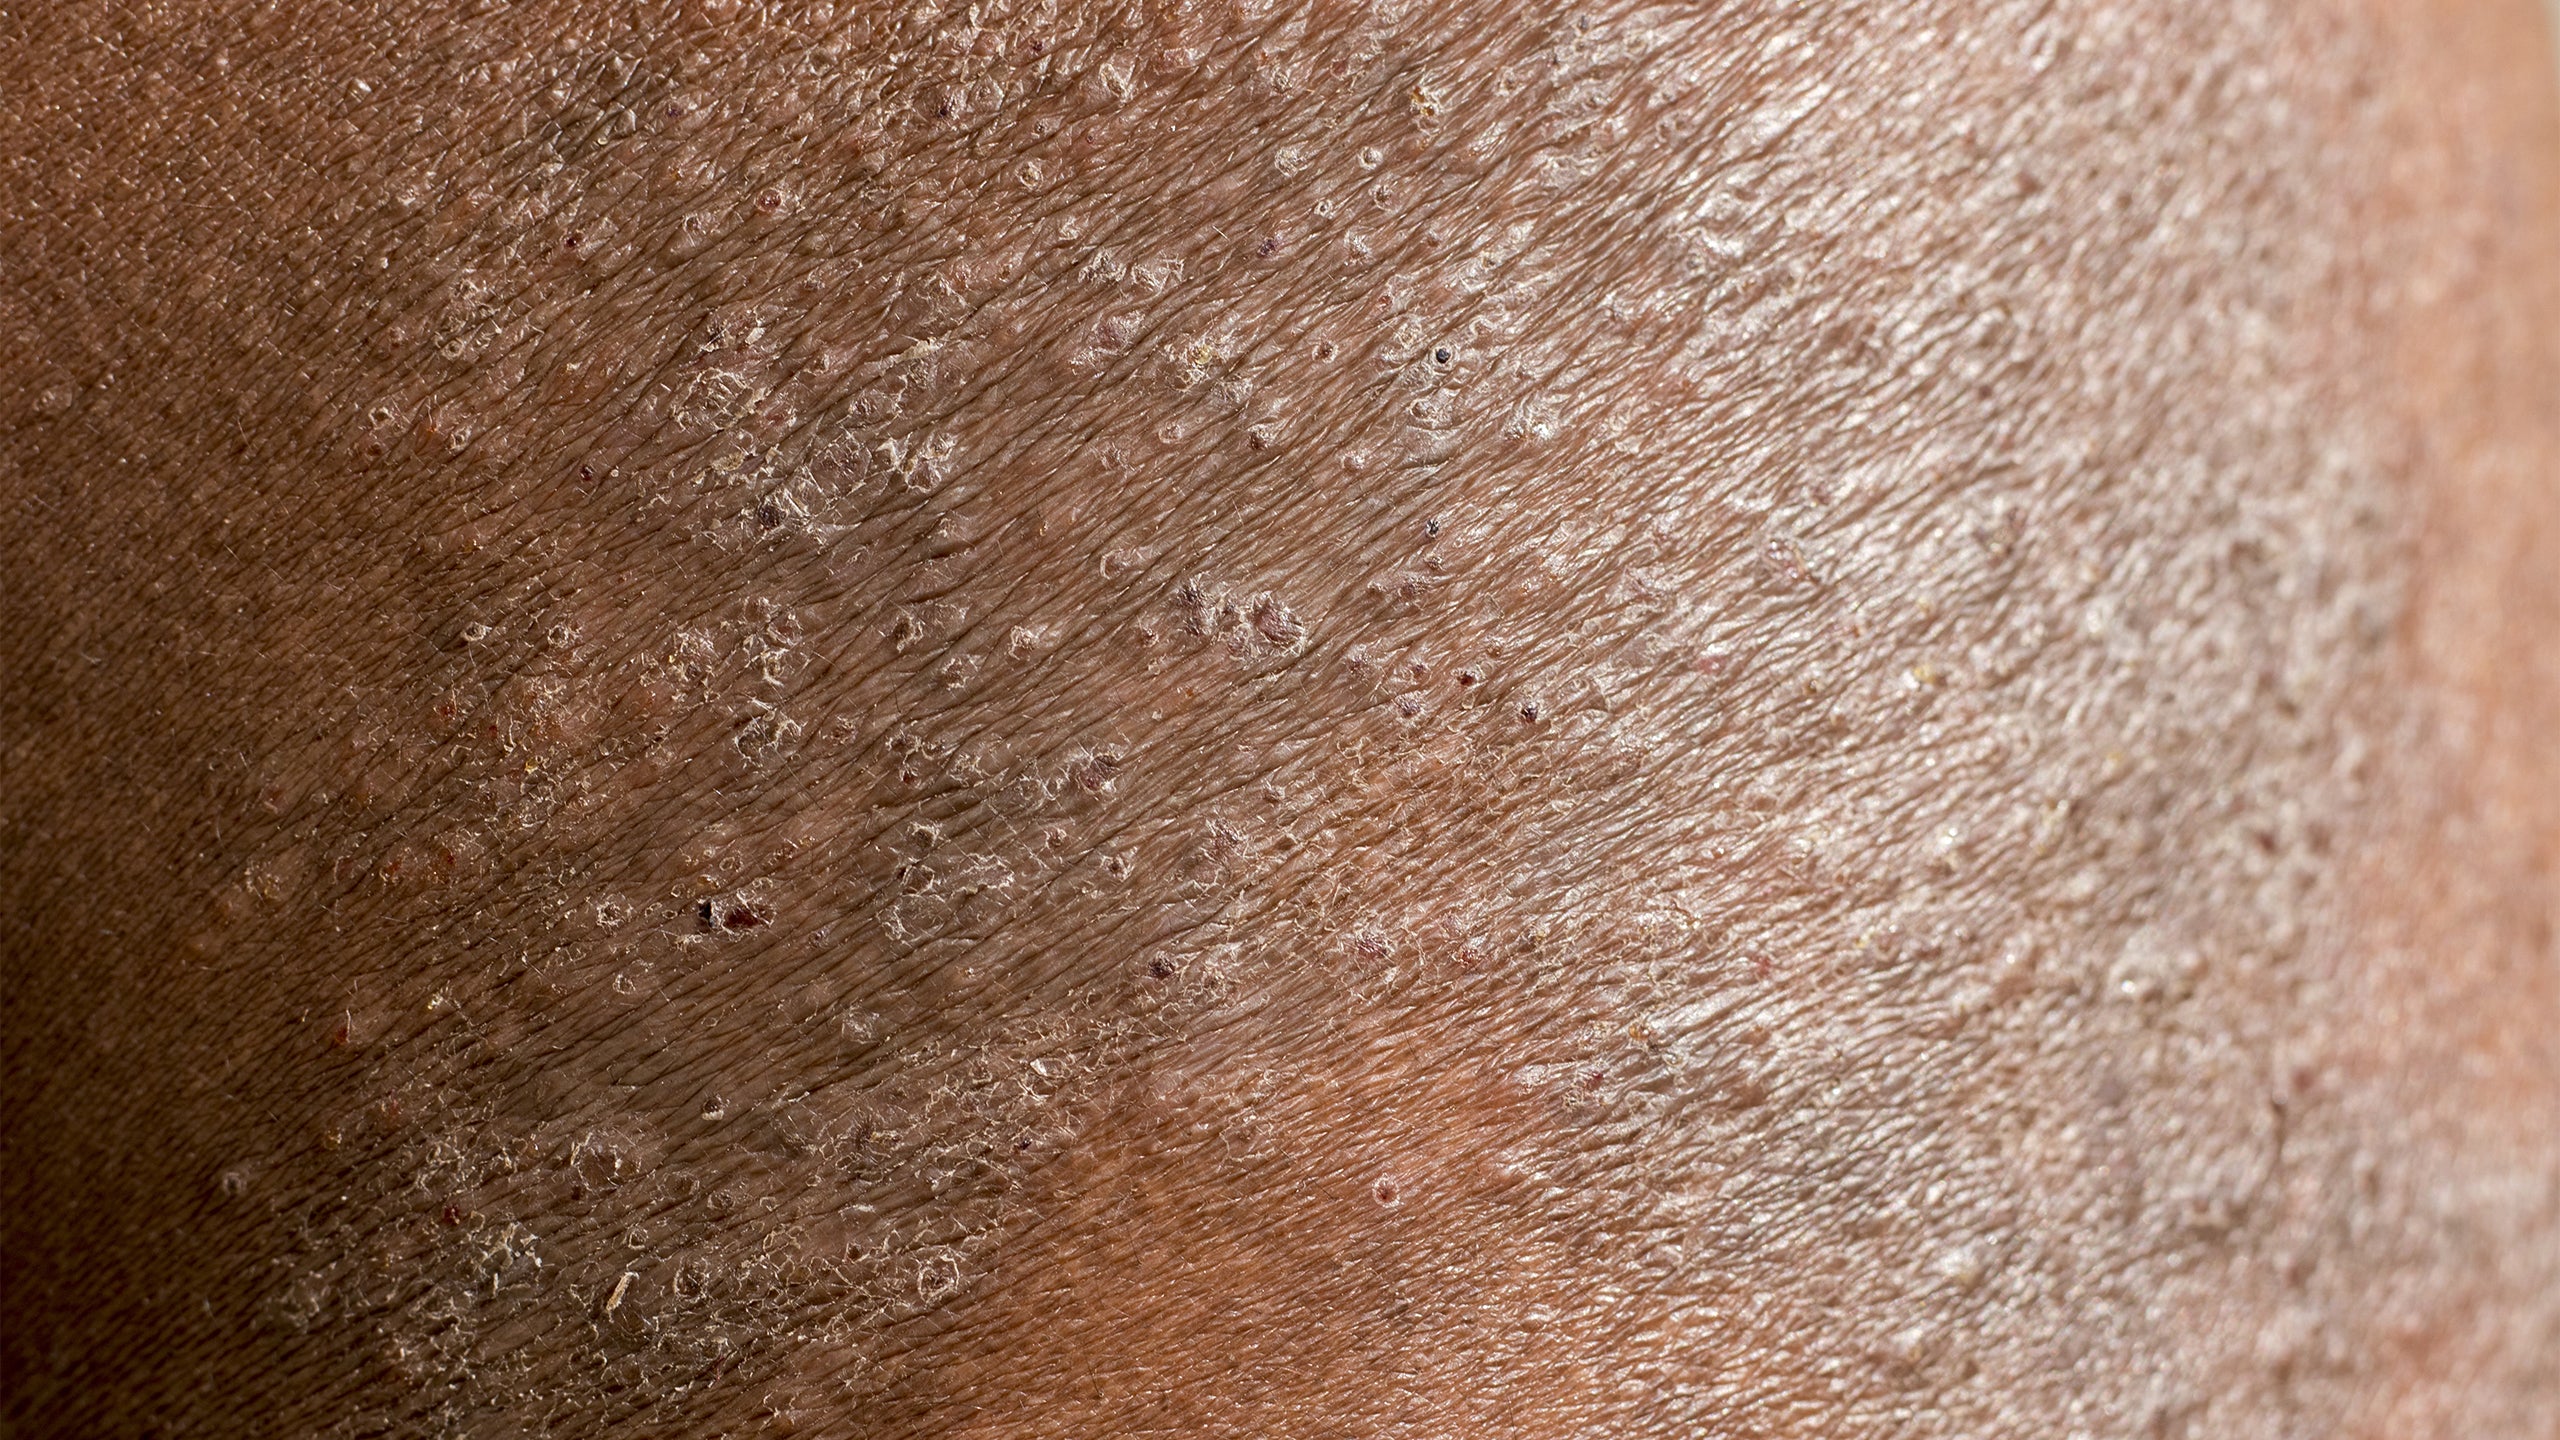 What You Need to Know About Eczema for People of Color - Gladskin